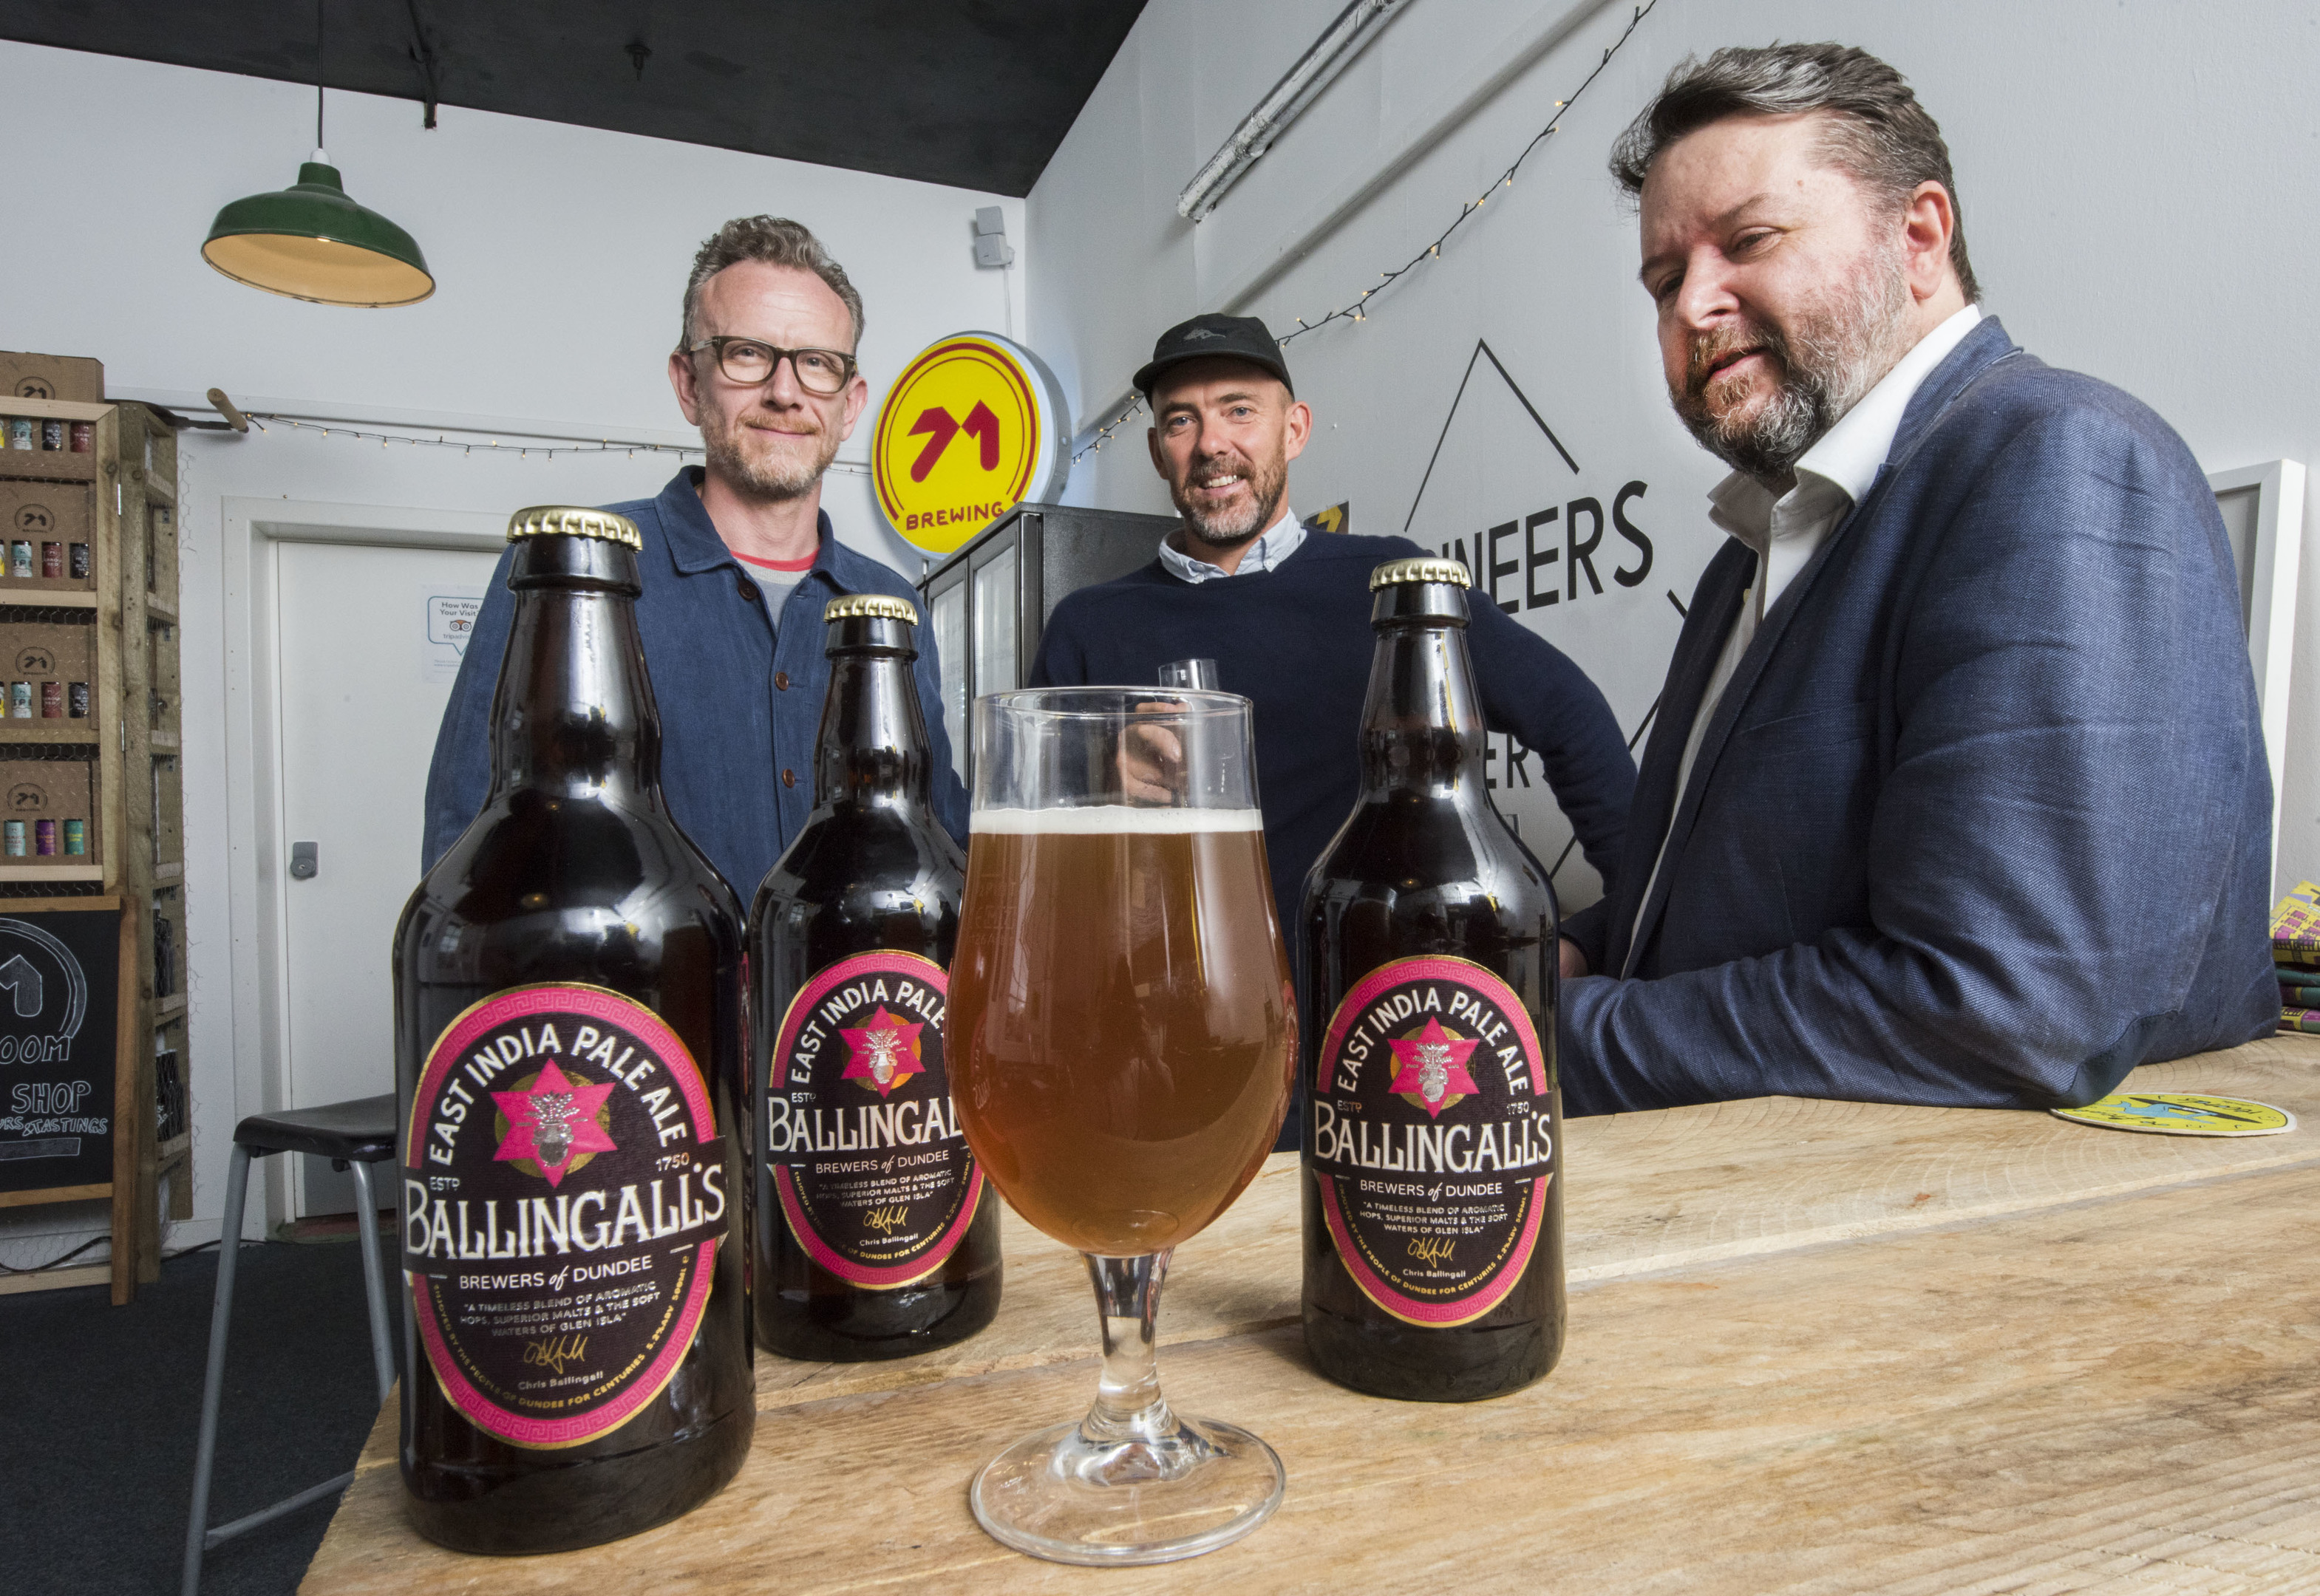 Brewer Duncan Alexander, 71 Brewing's Oliver Pilcher and Chris Ballingall try the new beer.